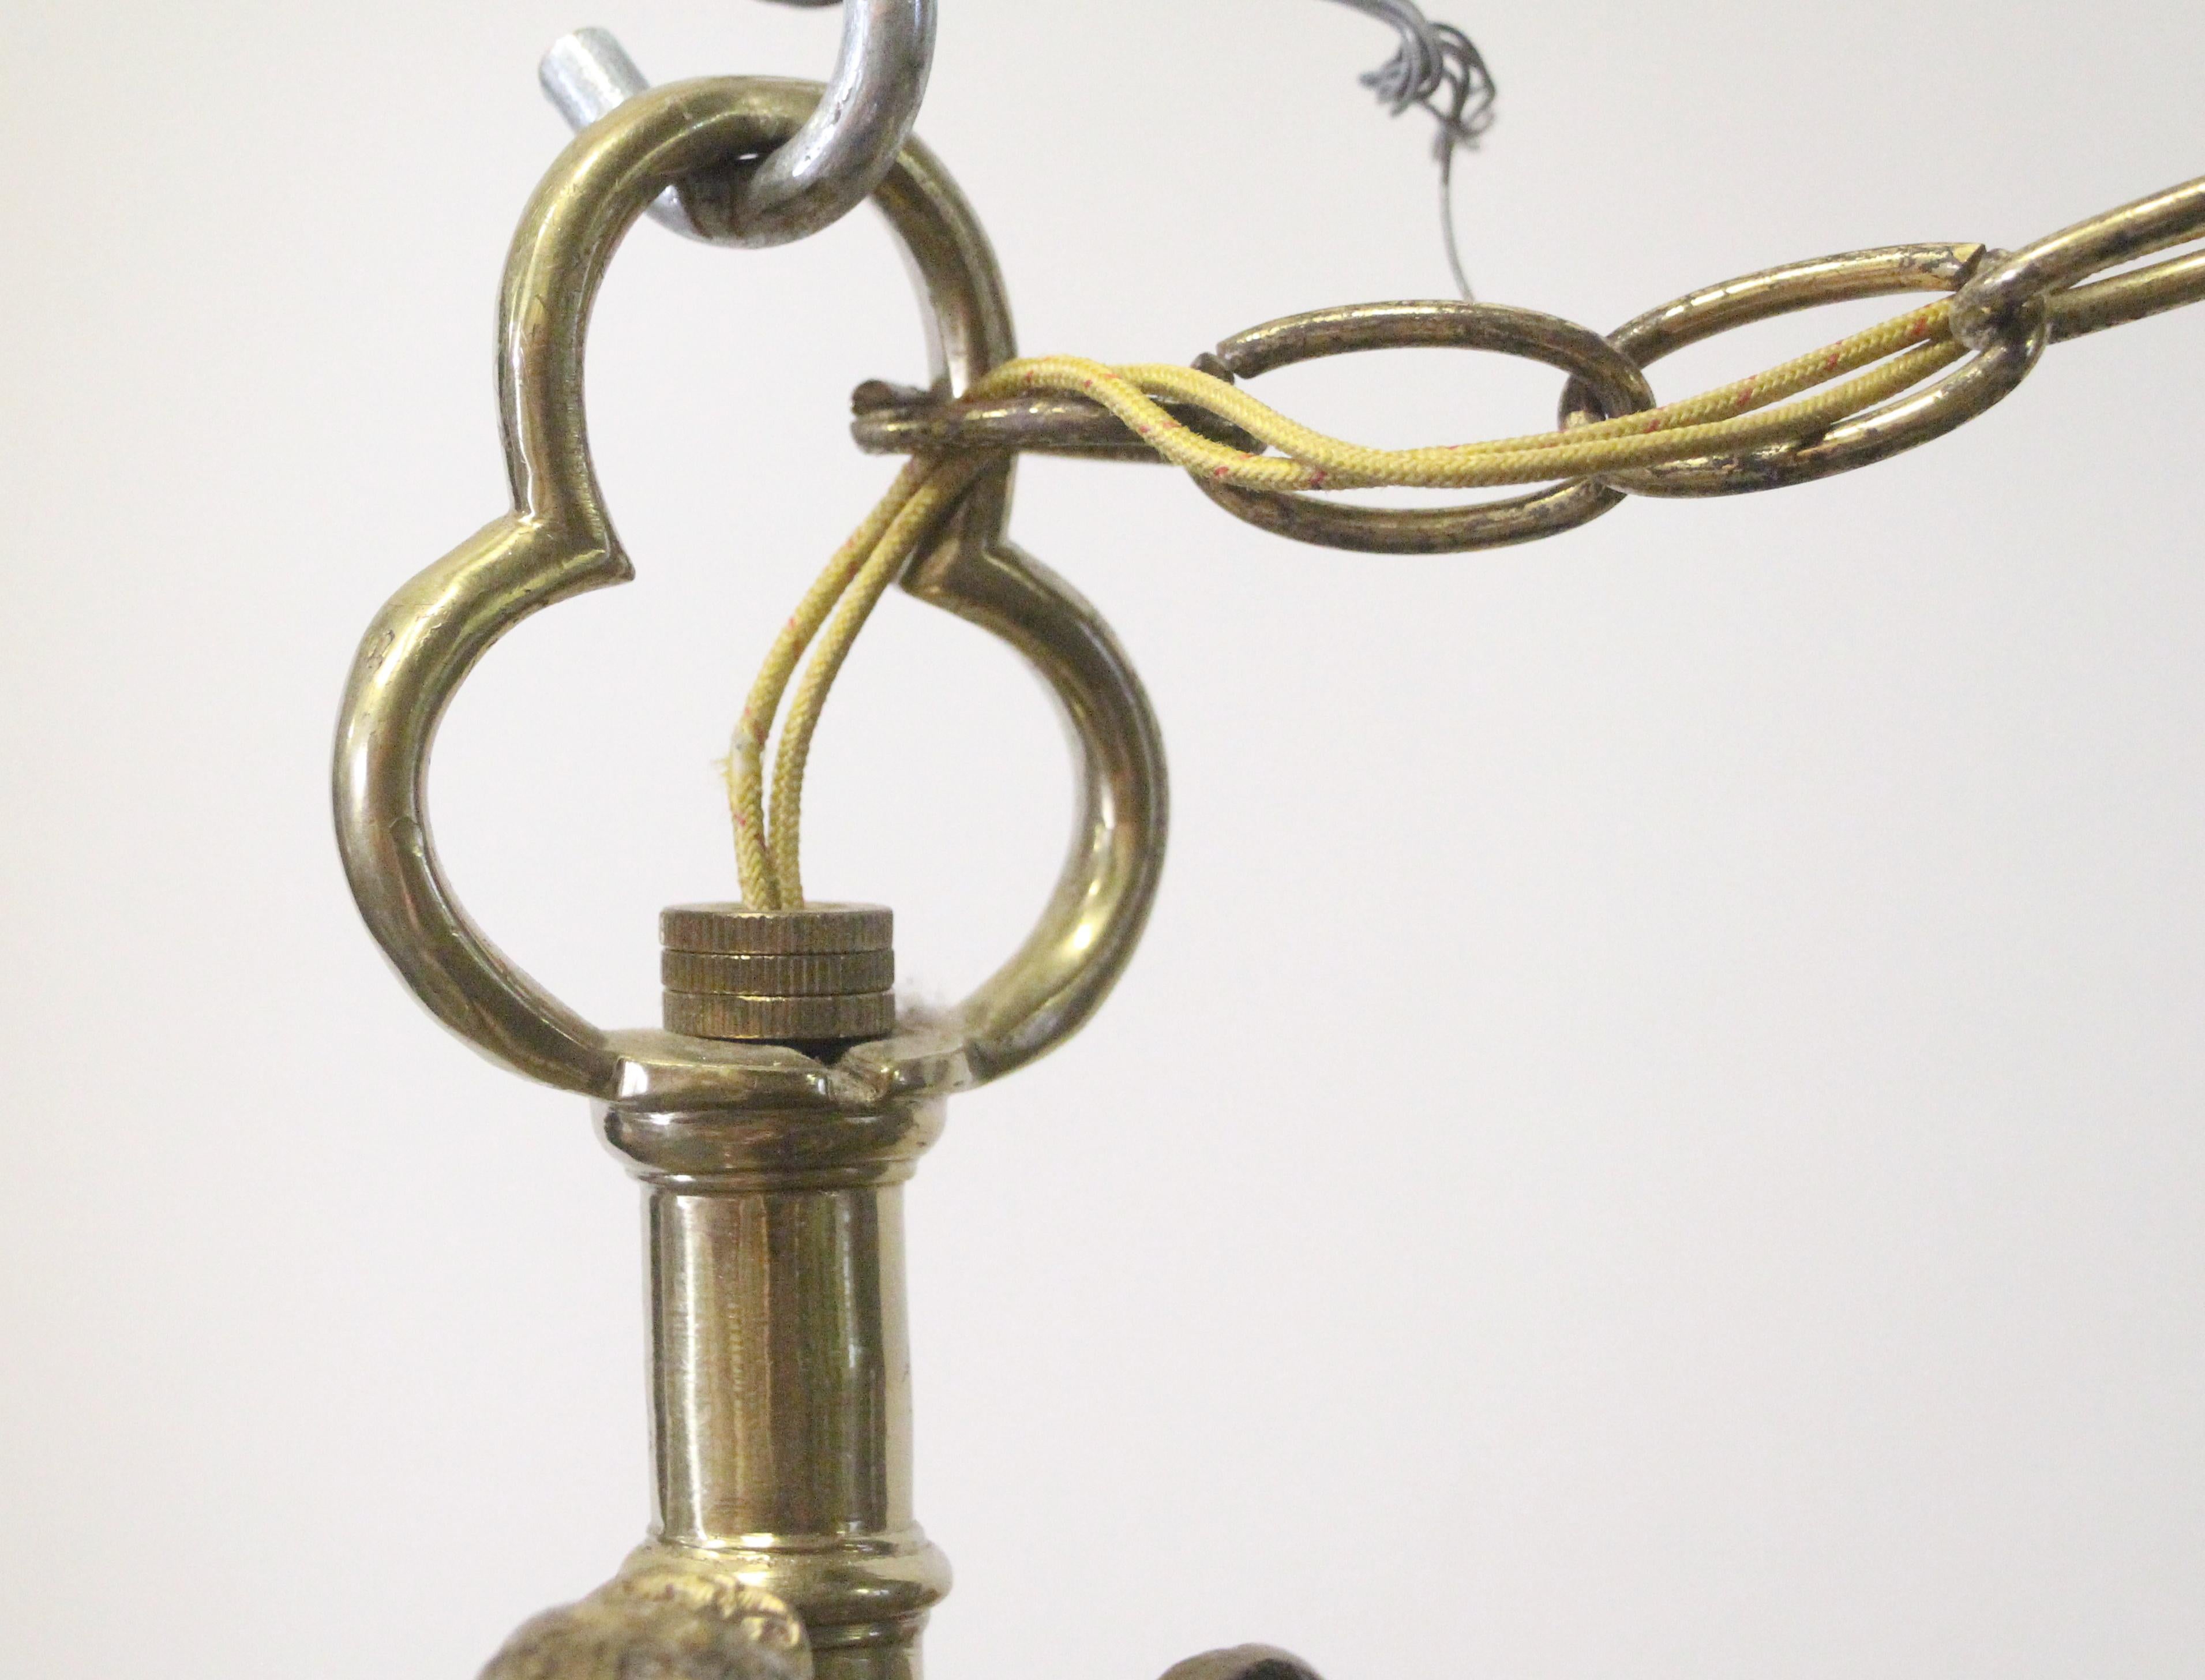 20th Century Early 1900s Brass 8-Arm Chandelier from NYC Stock Exchange w/ Eagle Finial